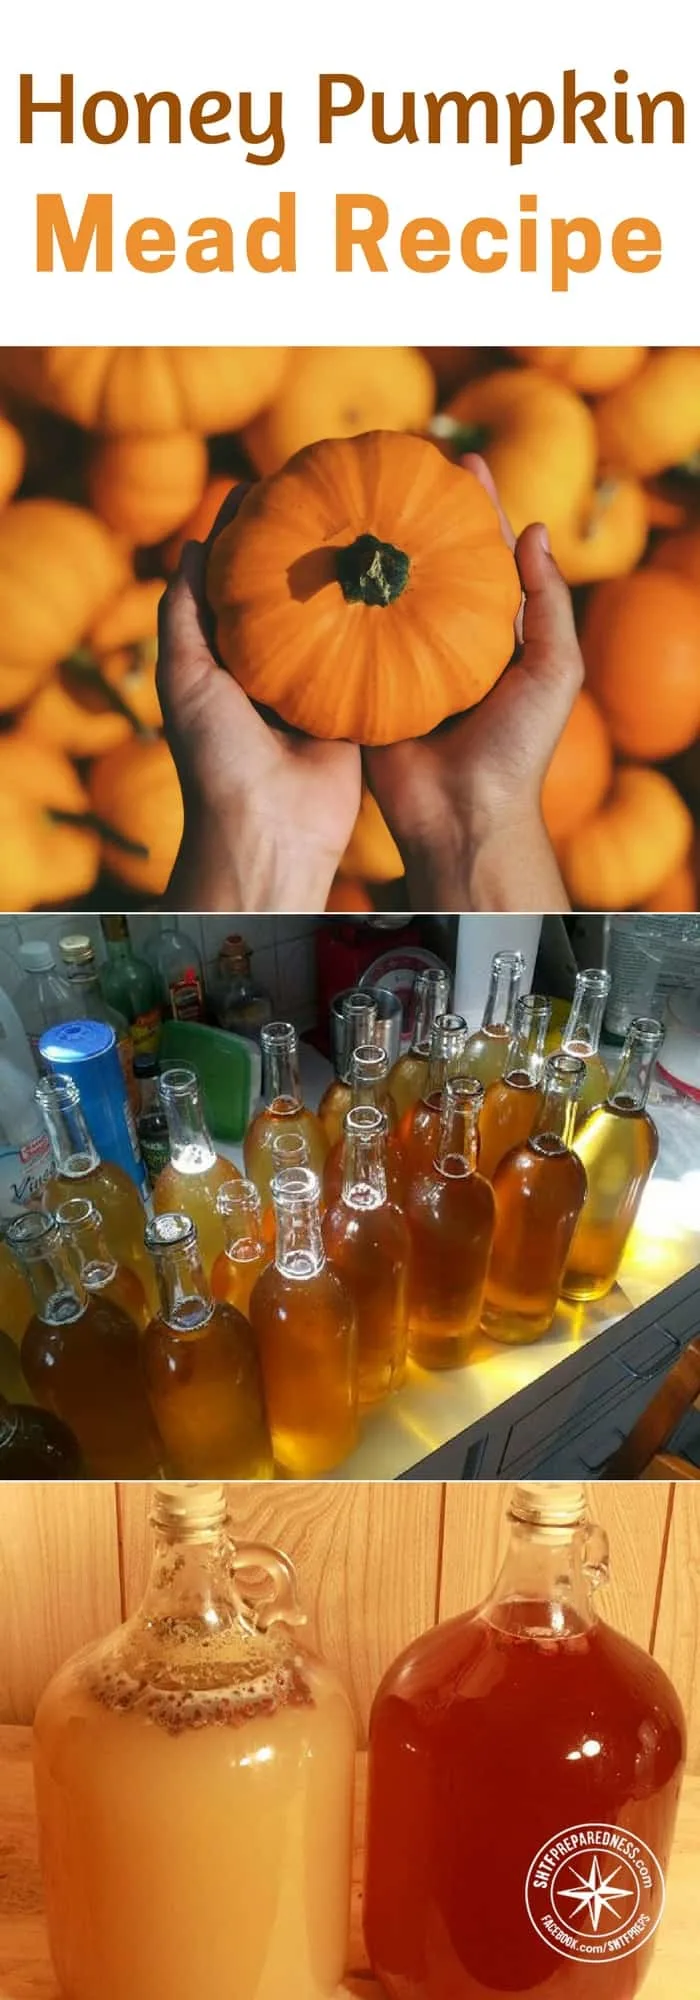 Honey Pumpkin Mead Recipe - According to gotmead.tumblr.com this mead is the color of a ripe peach and smells like autumn leaves - perfect for a Harvest blot. I have to agree, I made something very similar a few years ago around this time and it was the best tasting mead ever!